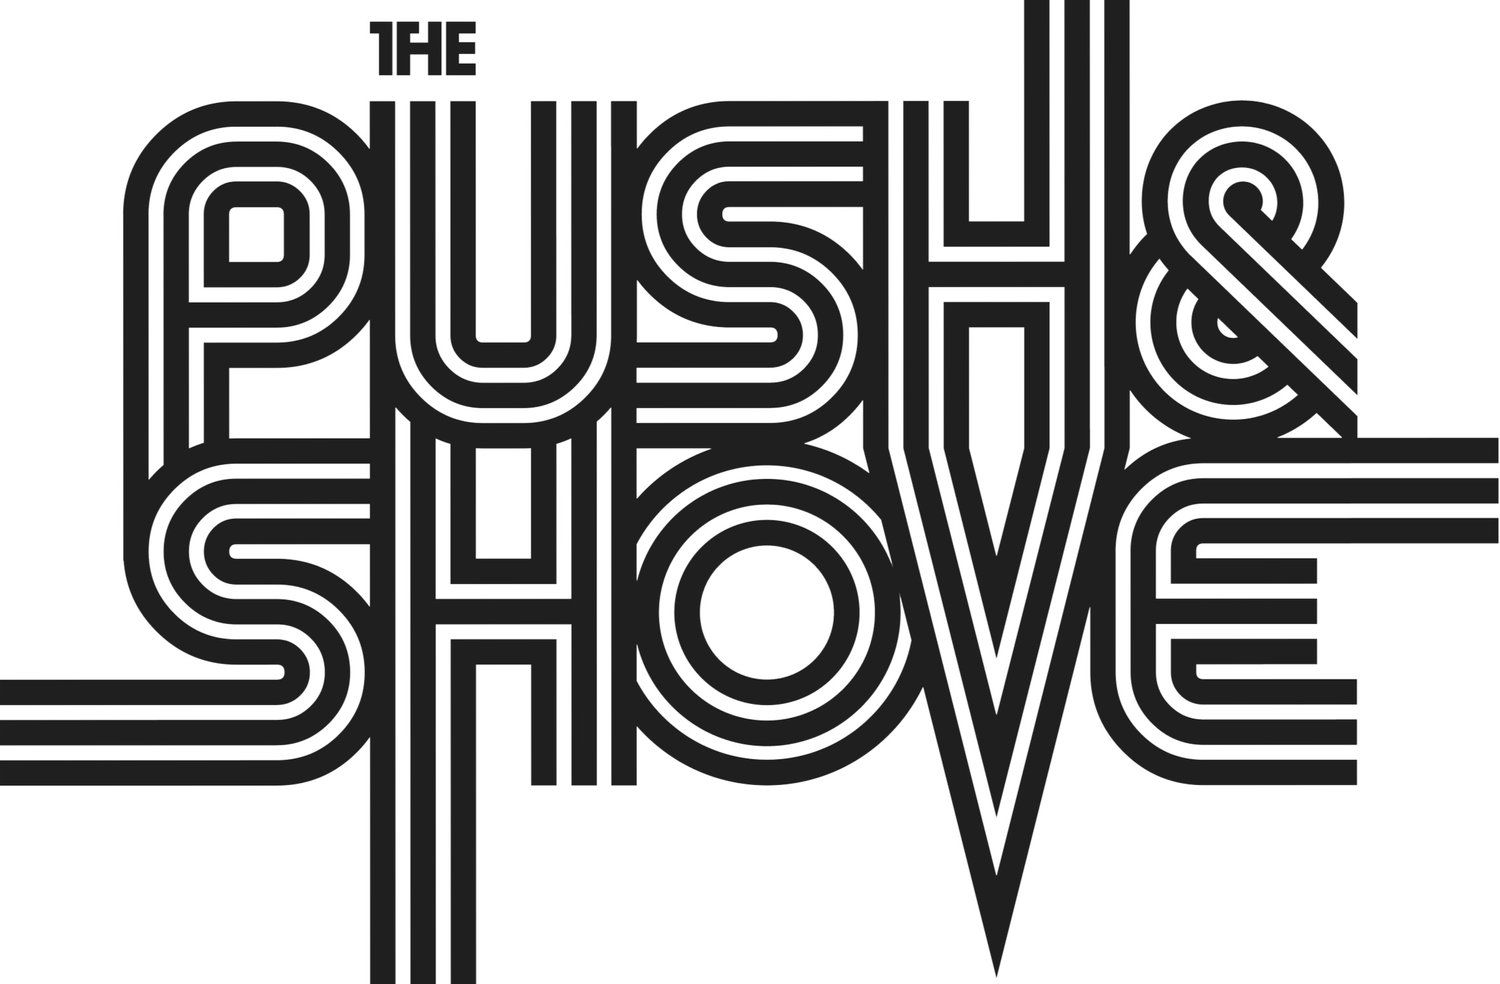 THE PUSH AND SHOVE